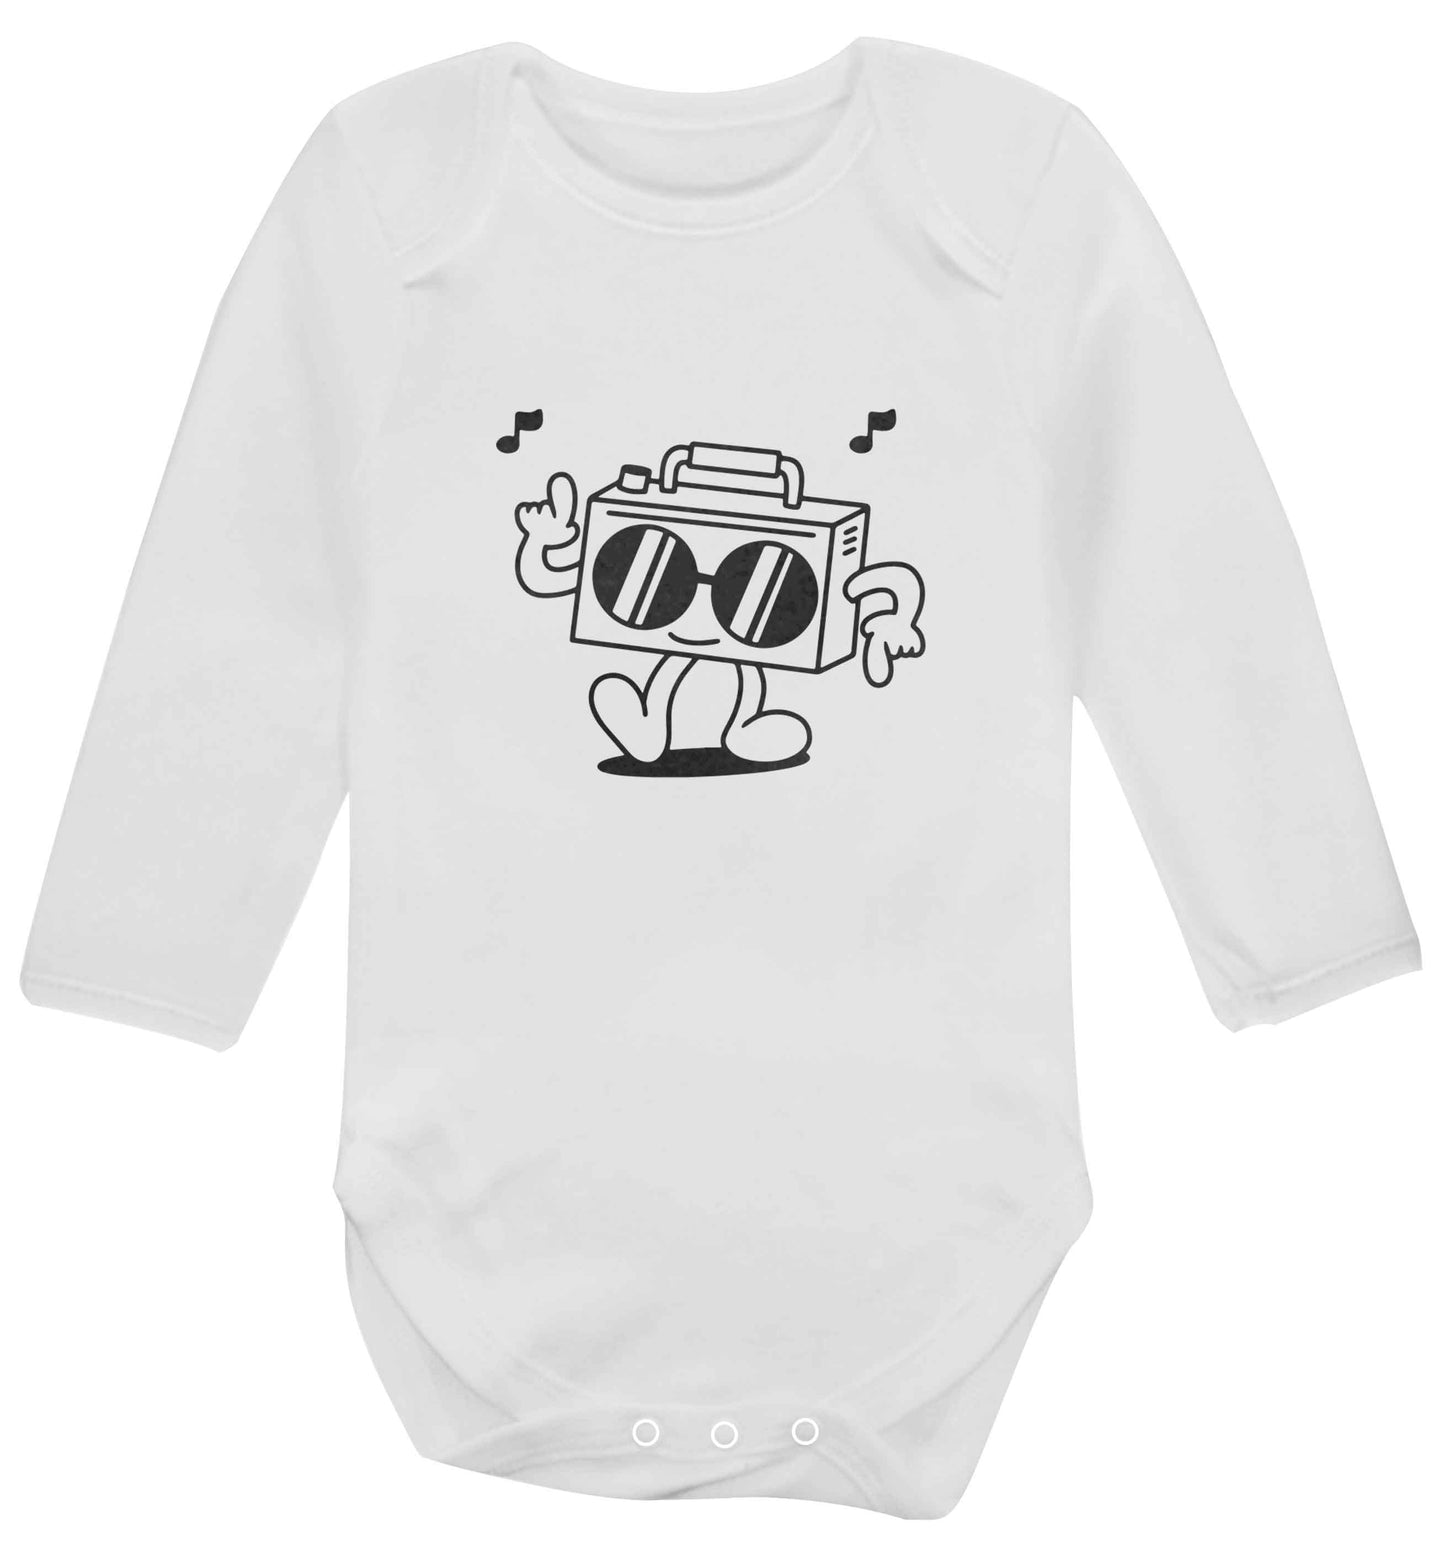 Boombox baby vest long sleeved white 6-12 months